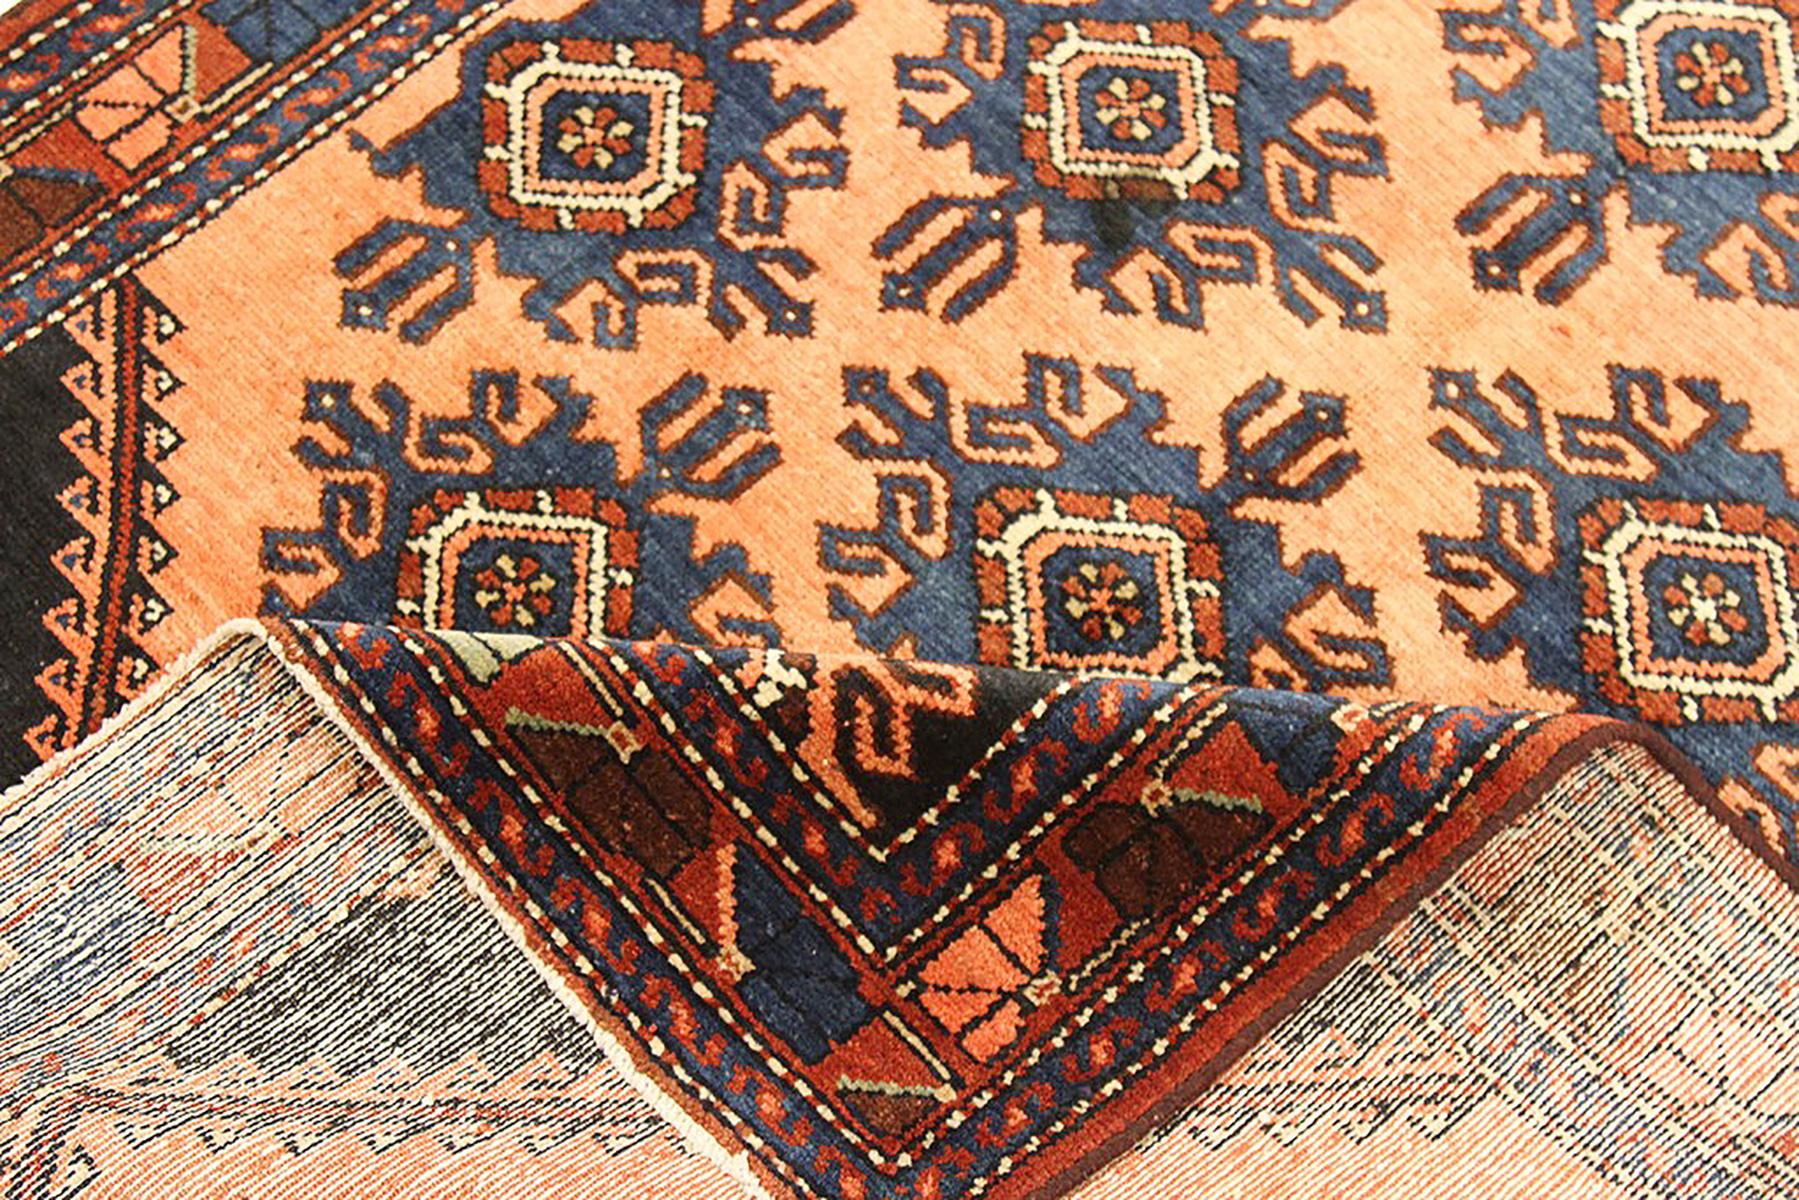 Islamic Antique Persian Hamadan Rug with Navy and Brown Floral Details on Black Field For Sale